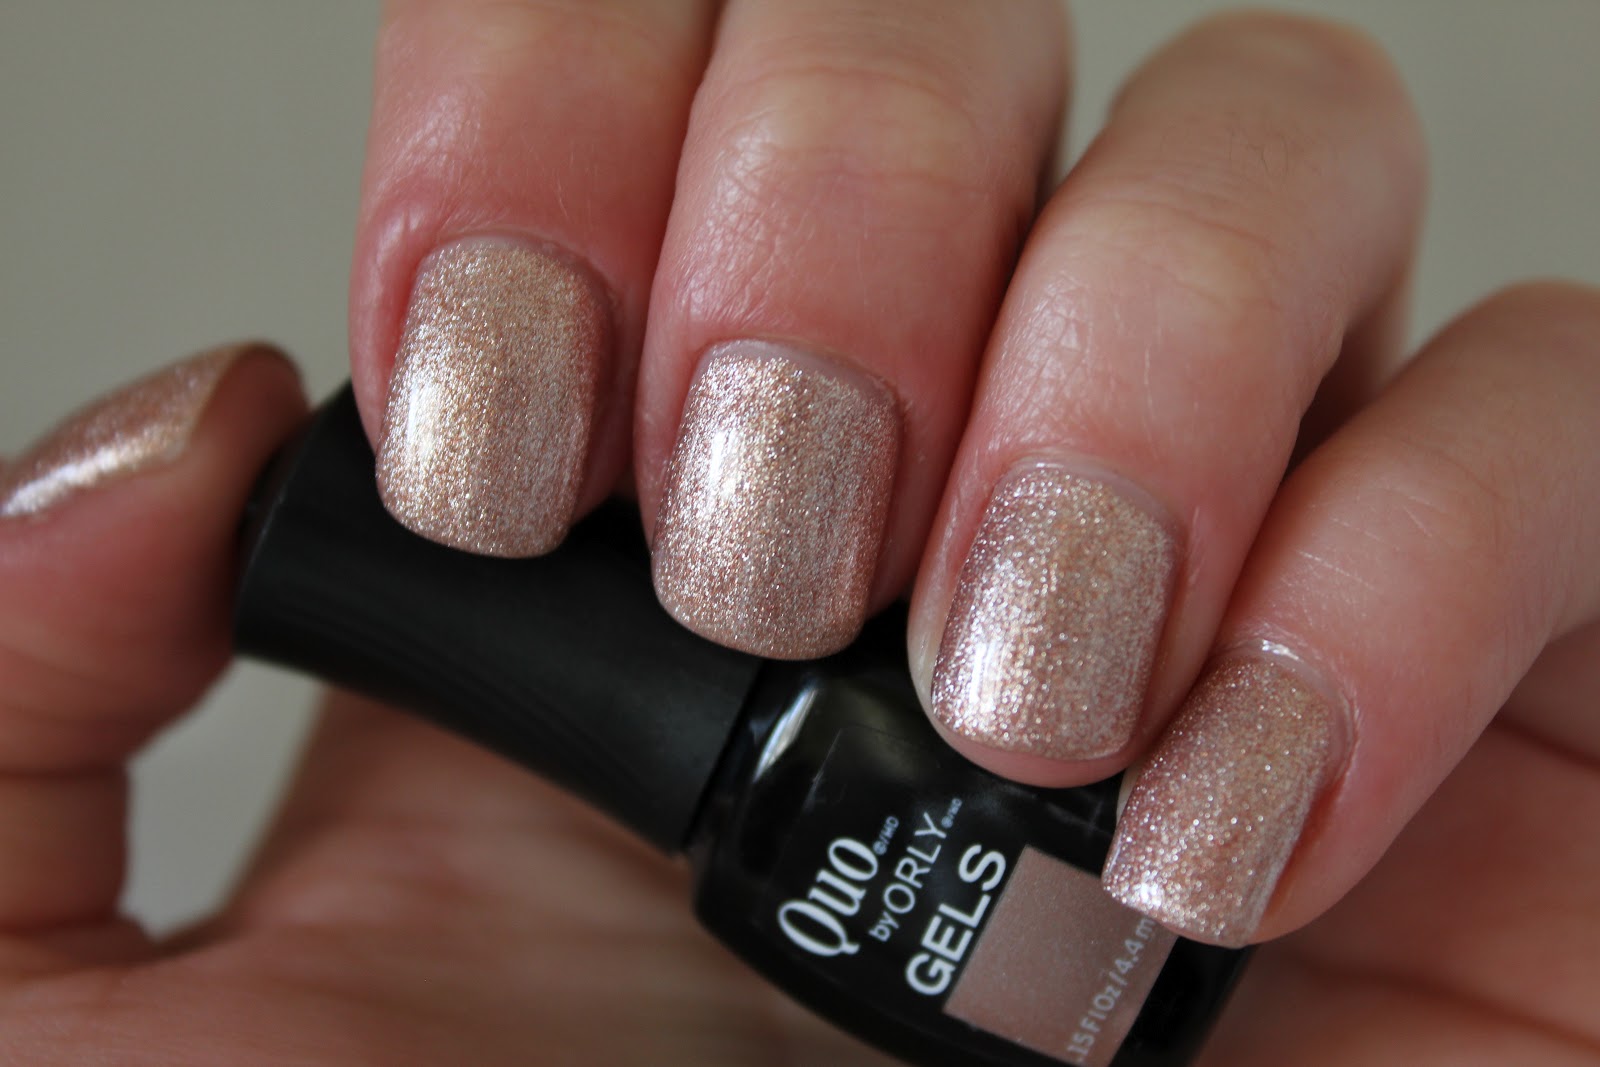 Orly Gel Nail Polish in "Bare Rose" - wide 10